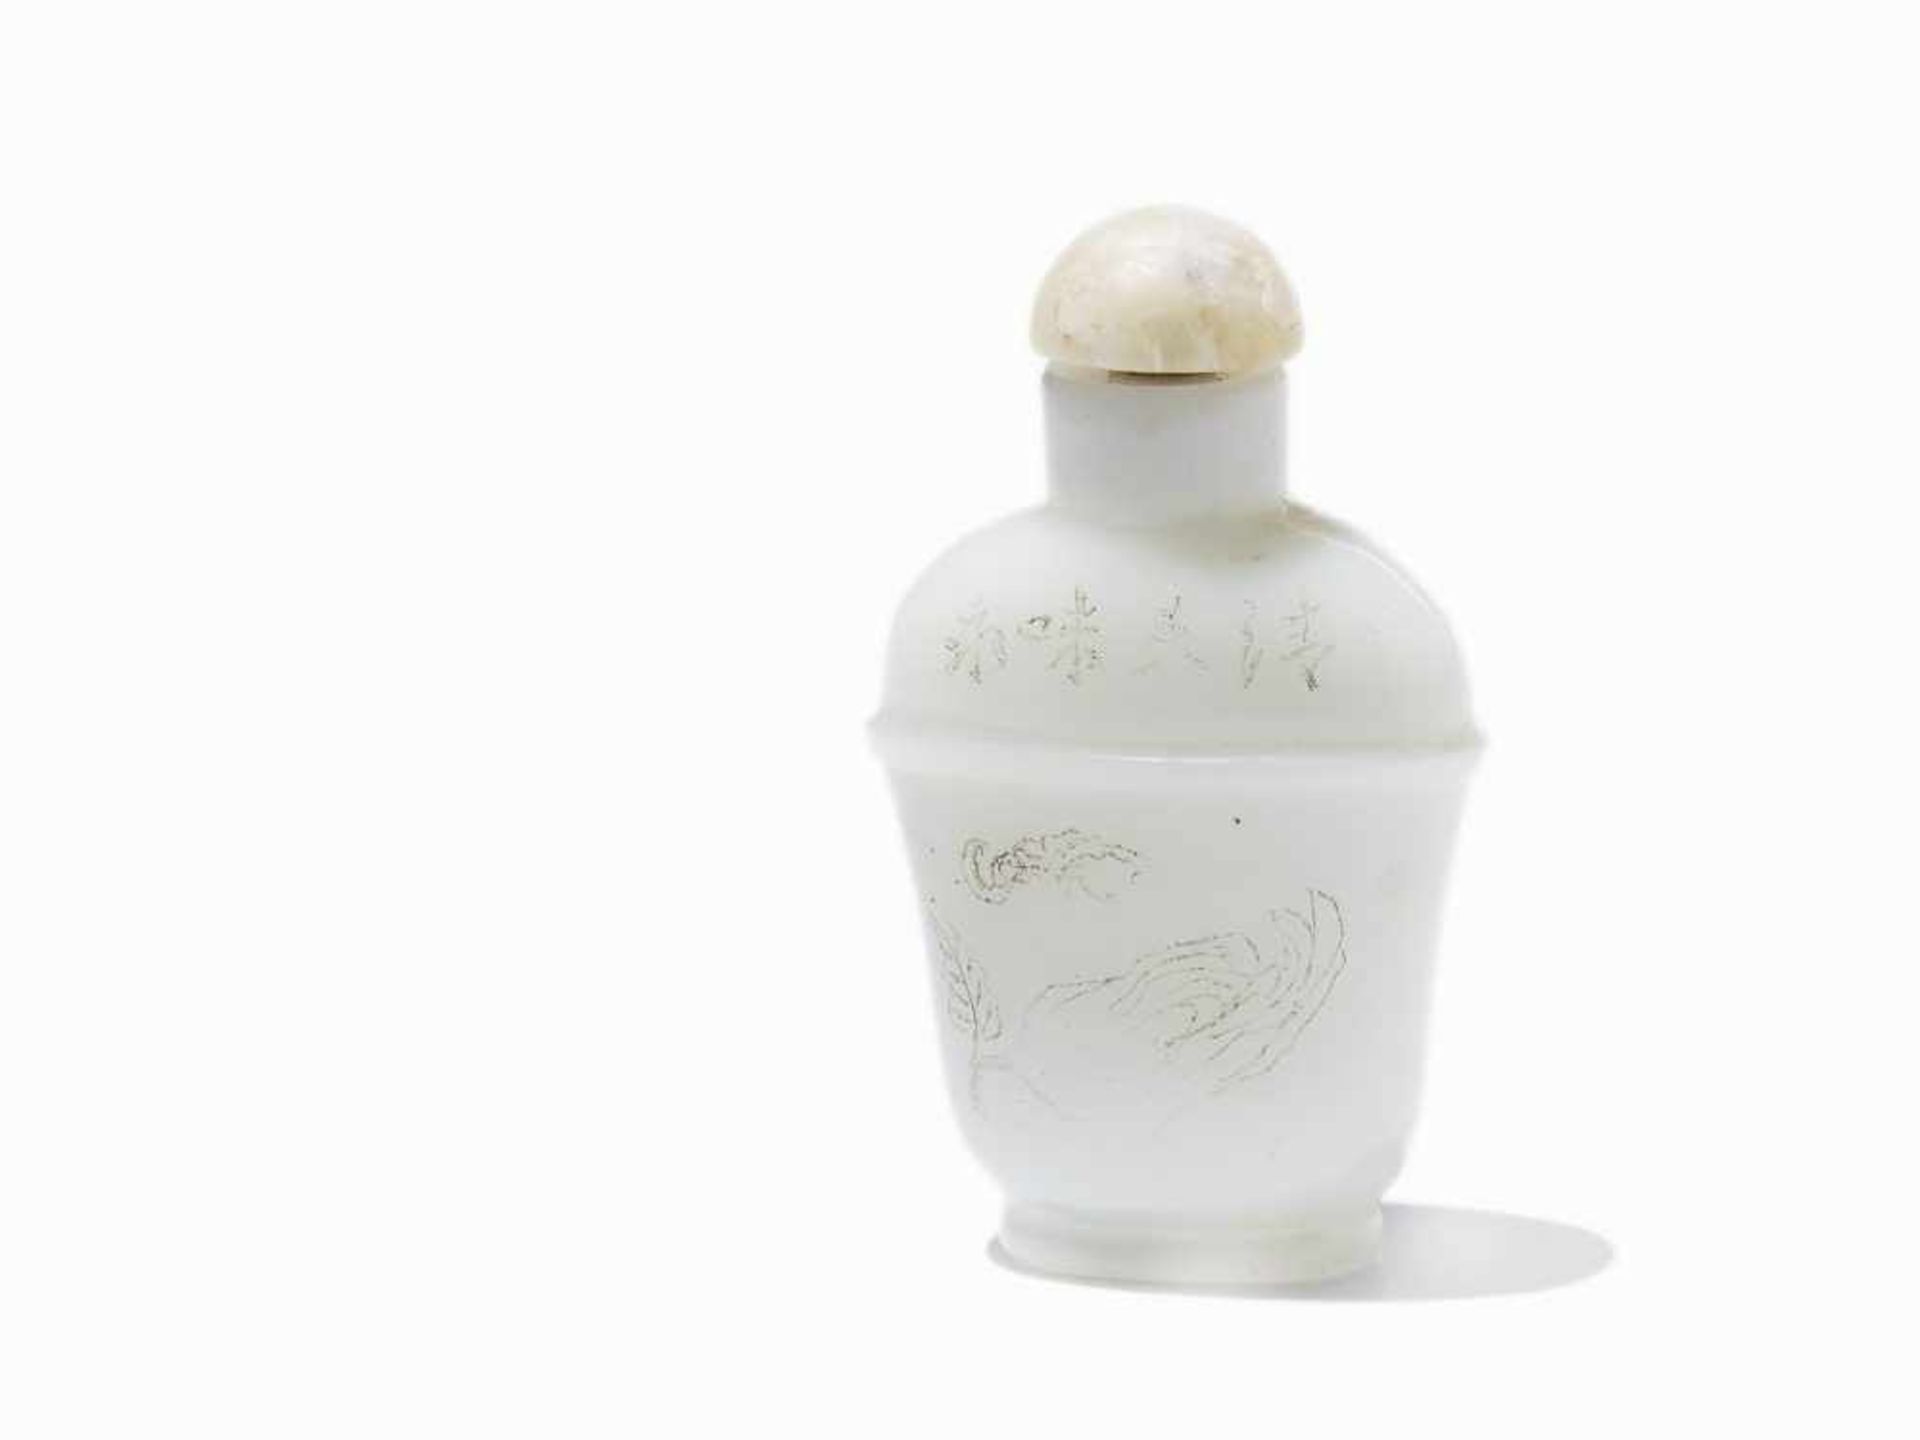 SNUFF BOTTLE WITH INCISED DECORATION Milk glass, quartz. China, Republic period, early 20th